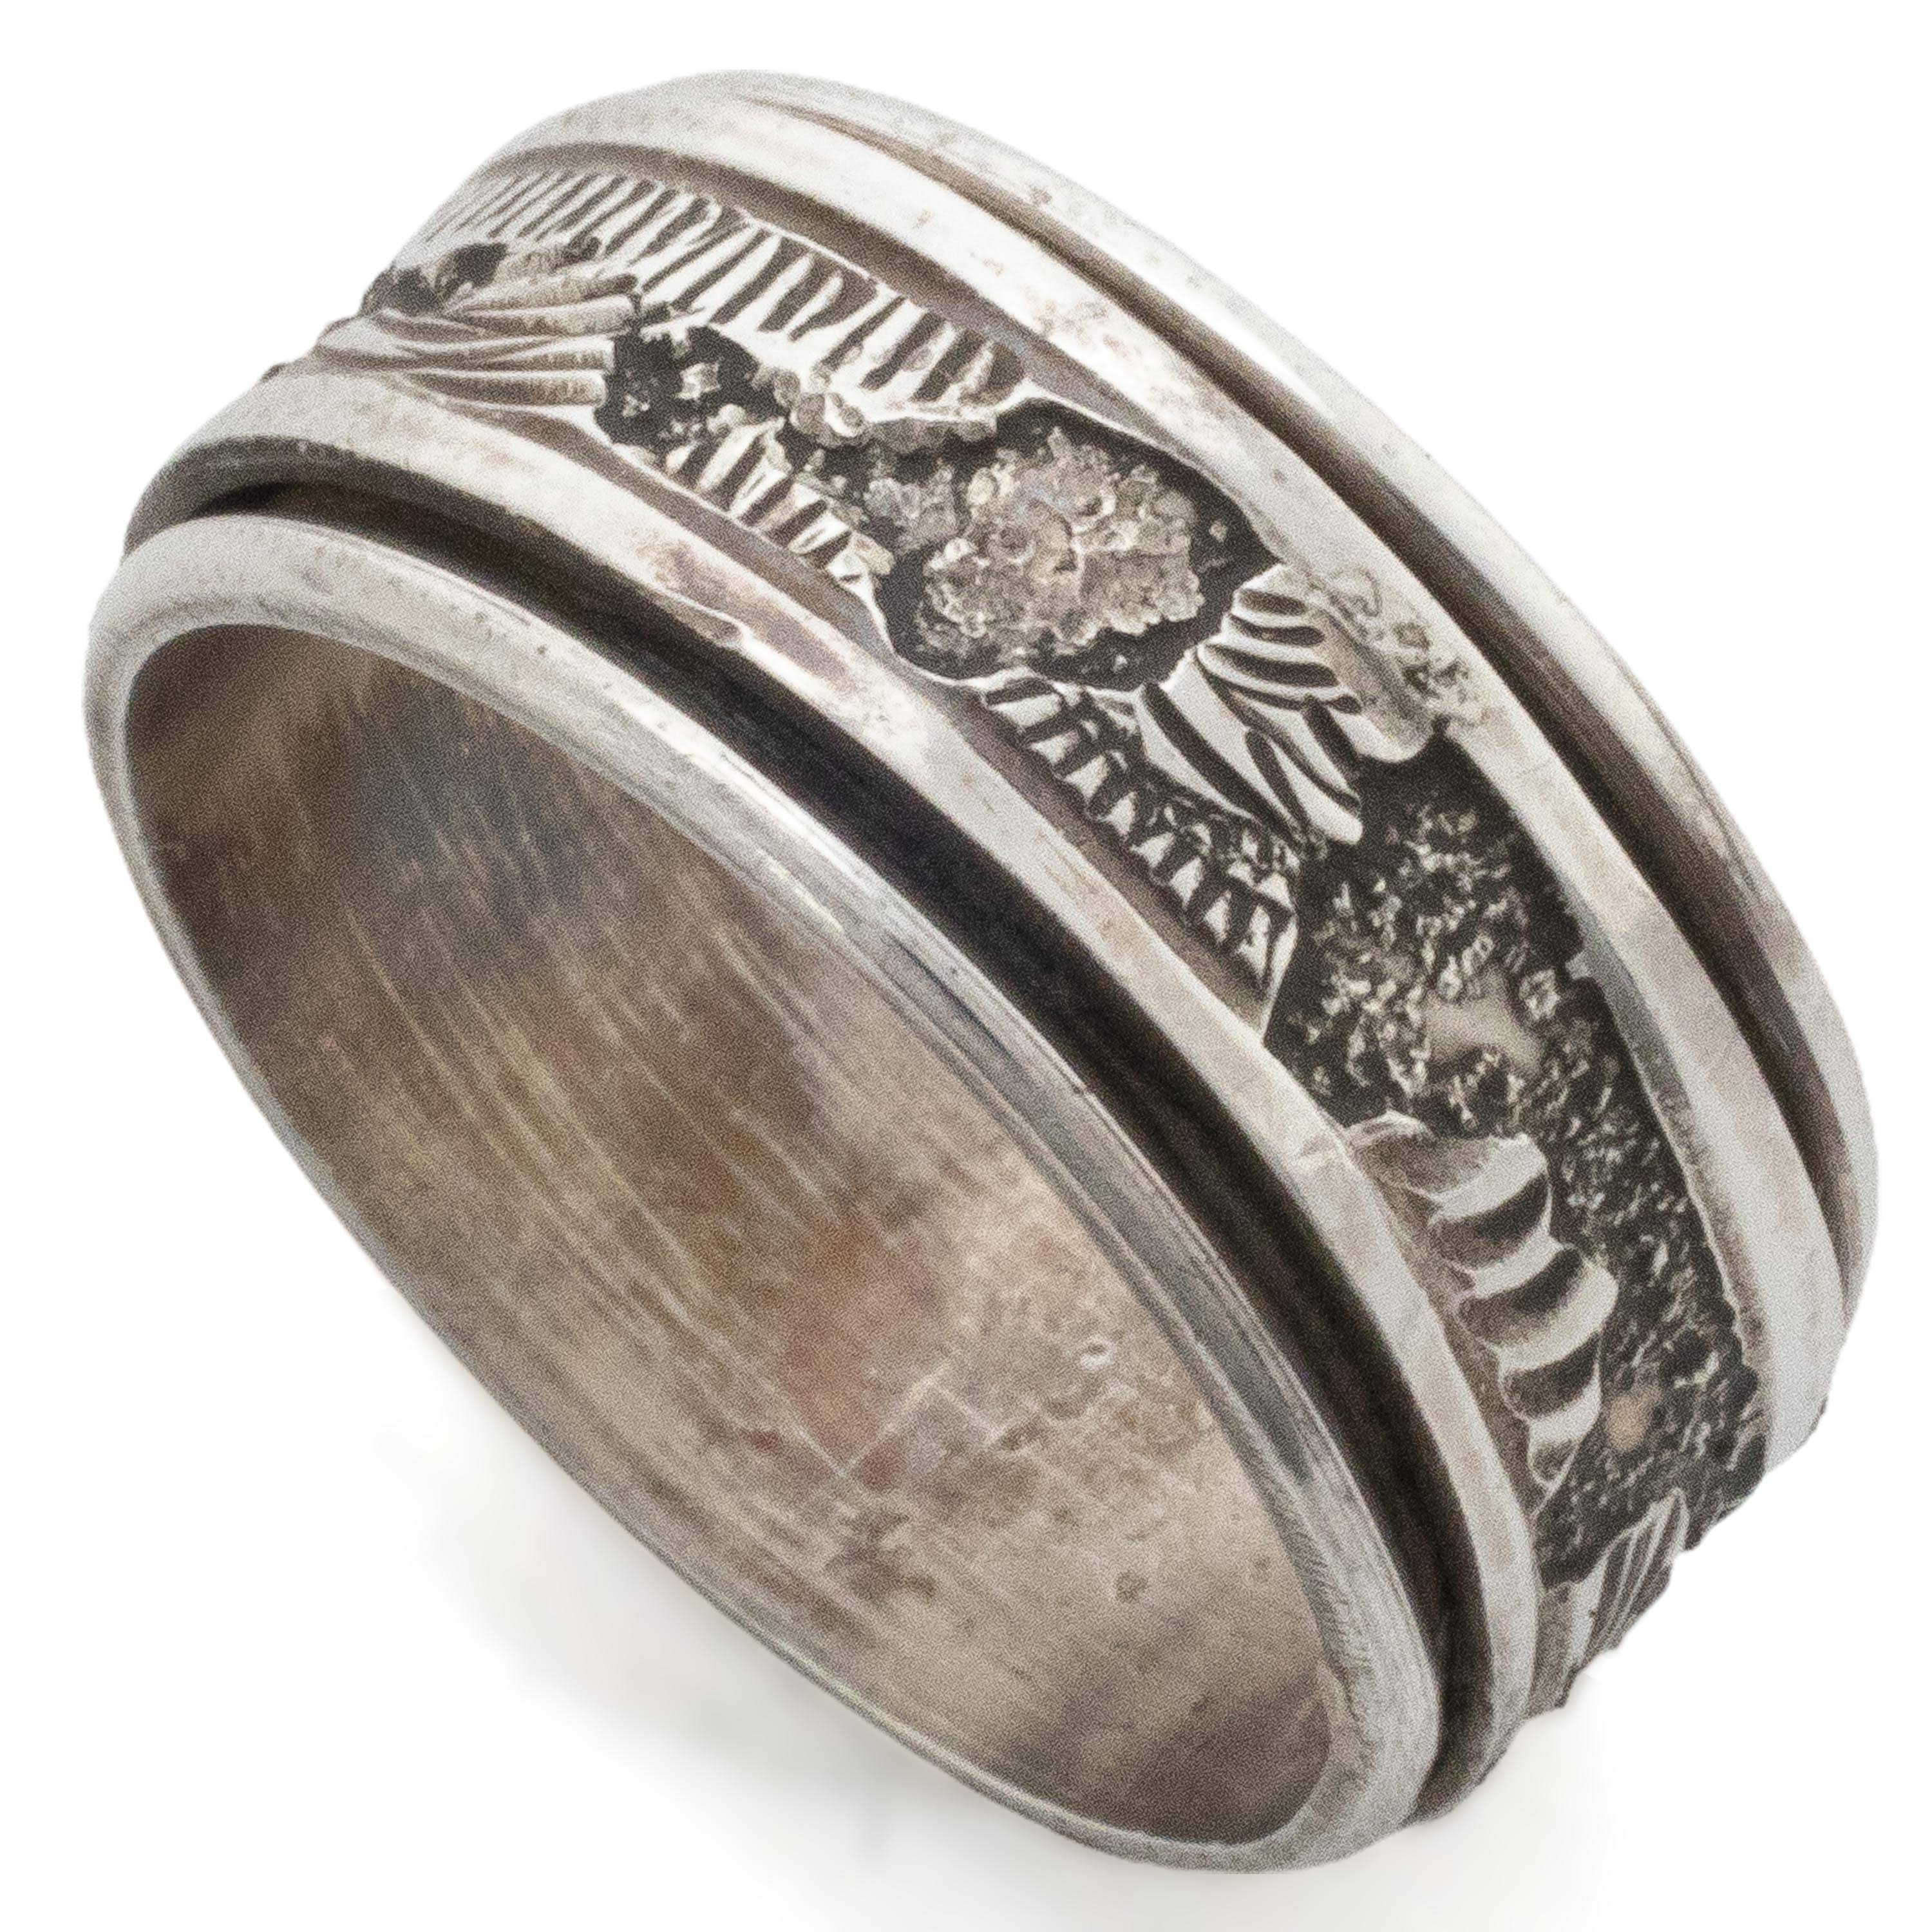 Kalifano Native American Jewelry 11 Elaine Becenti Navajo Freeform USA Native American Made 925 Sterling Silver Ring NAR200.028.11